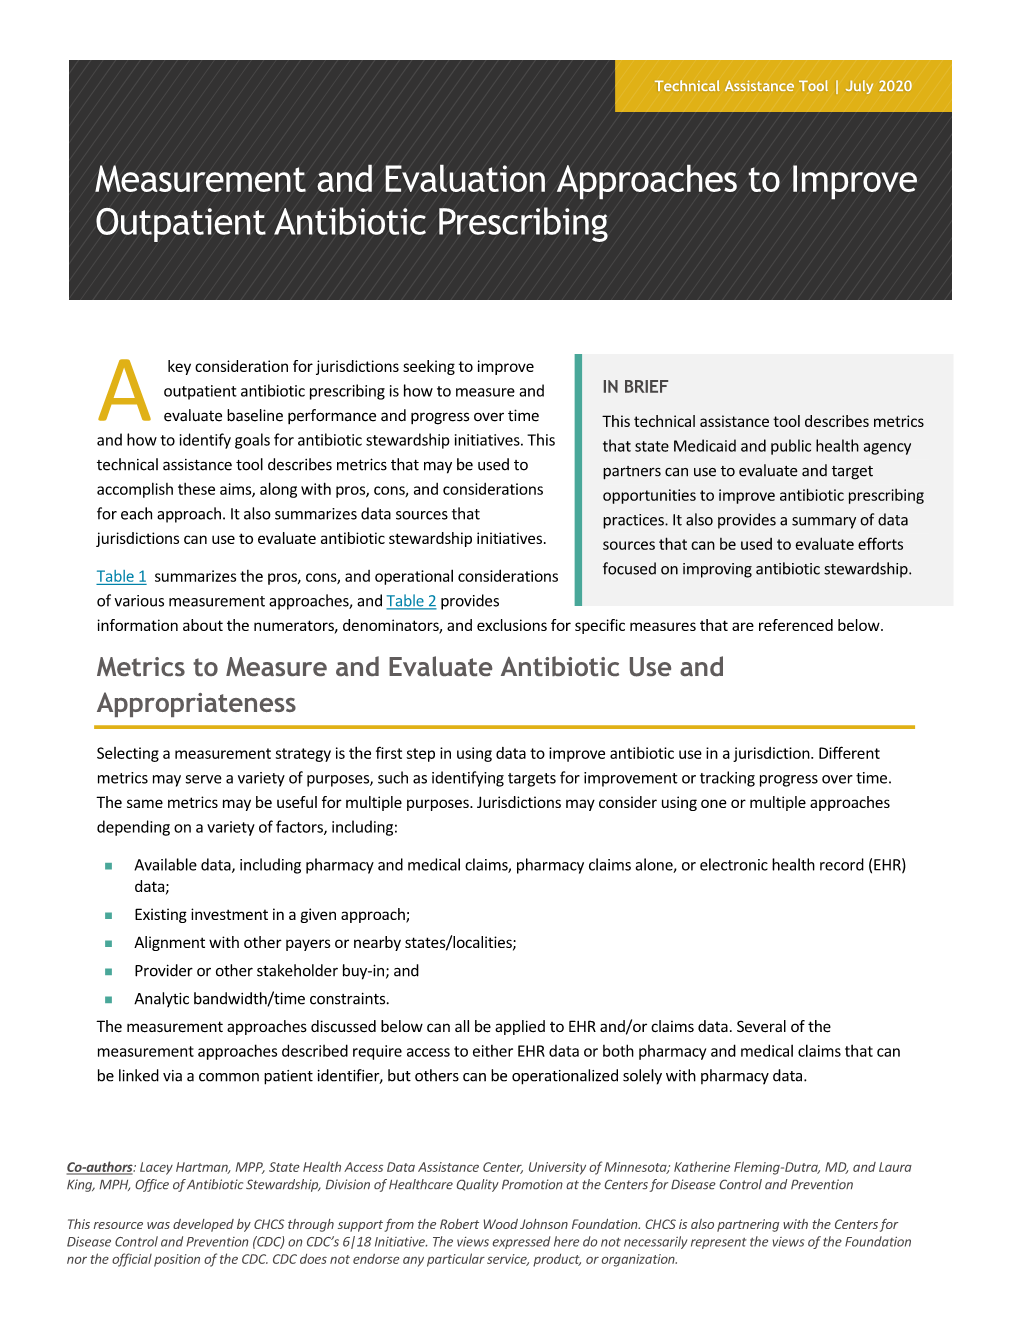 Measurement and Evaluation Approaches to Improve Outpatient Antibiotic Prescribing